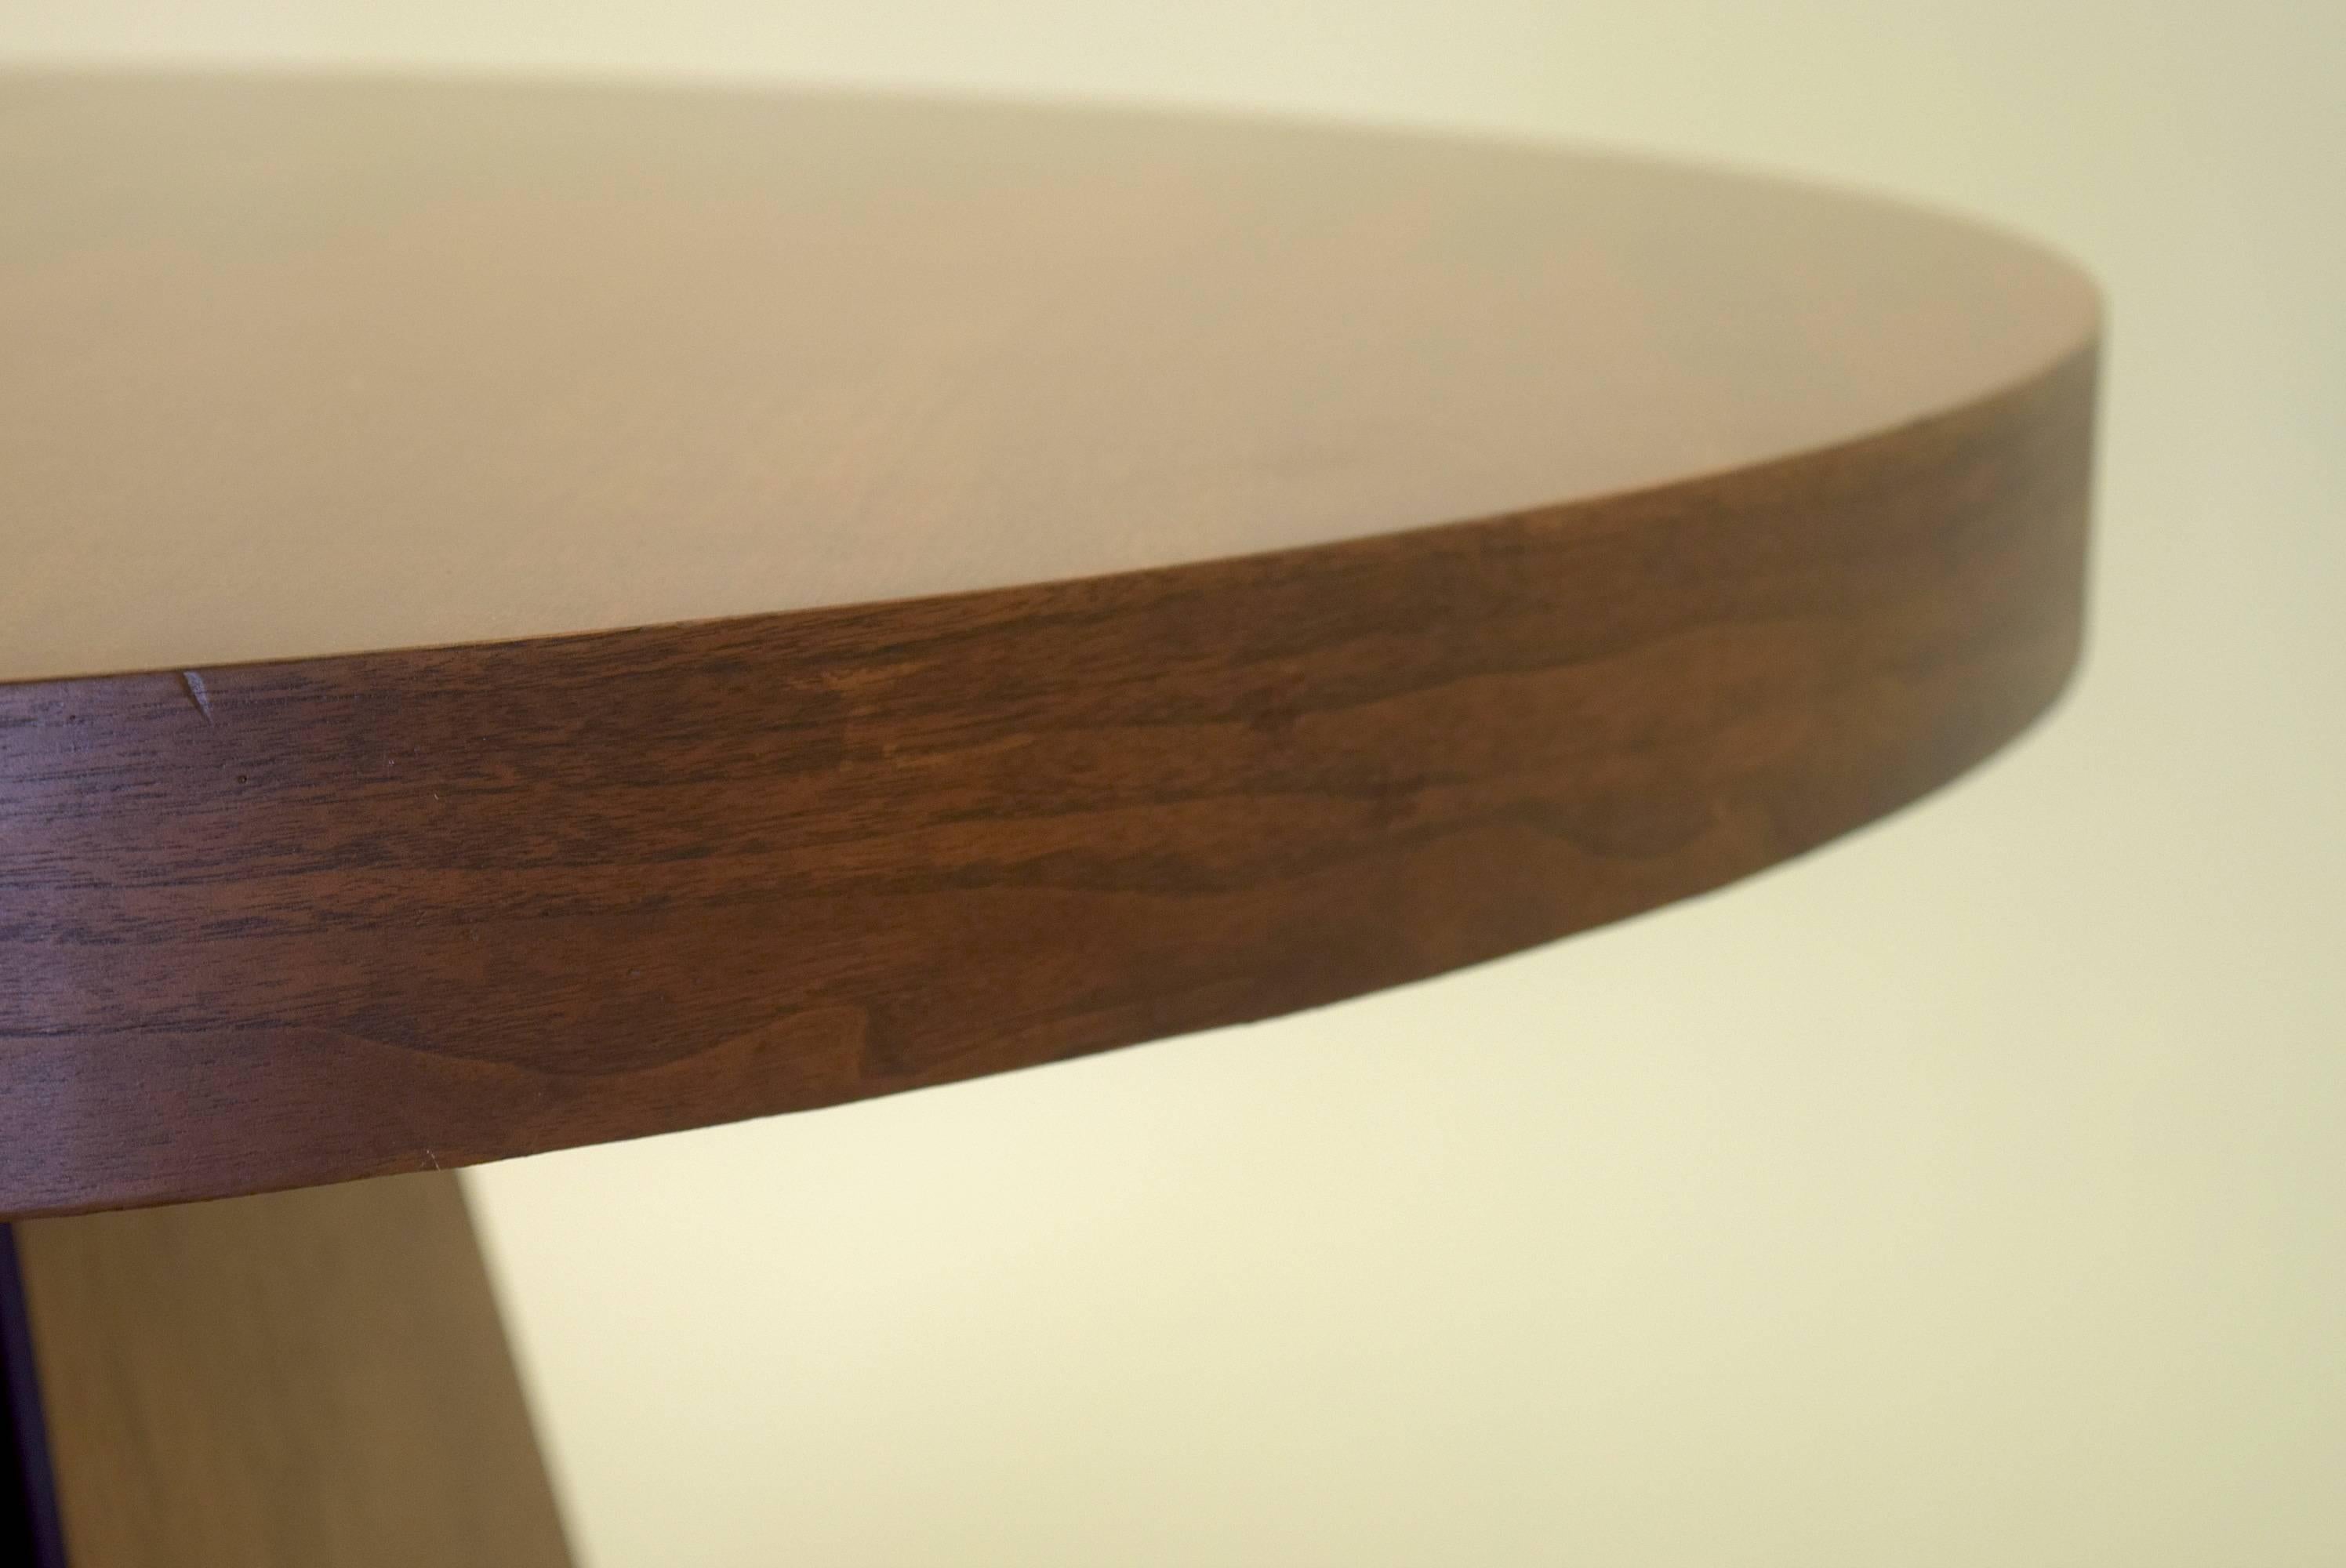 20th Century Pierre Cardin Round Obelisk Dining Table in Walnut with Extension Leaf